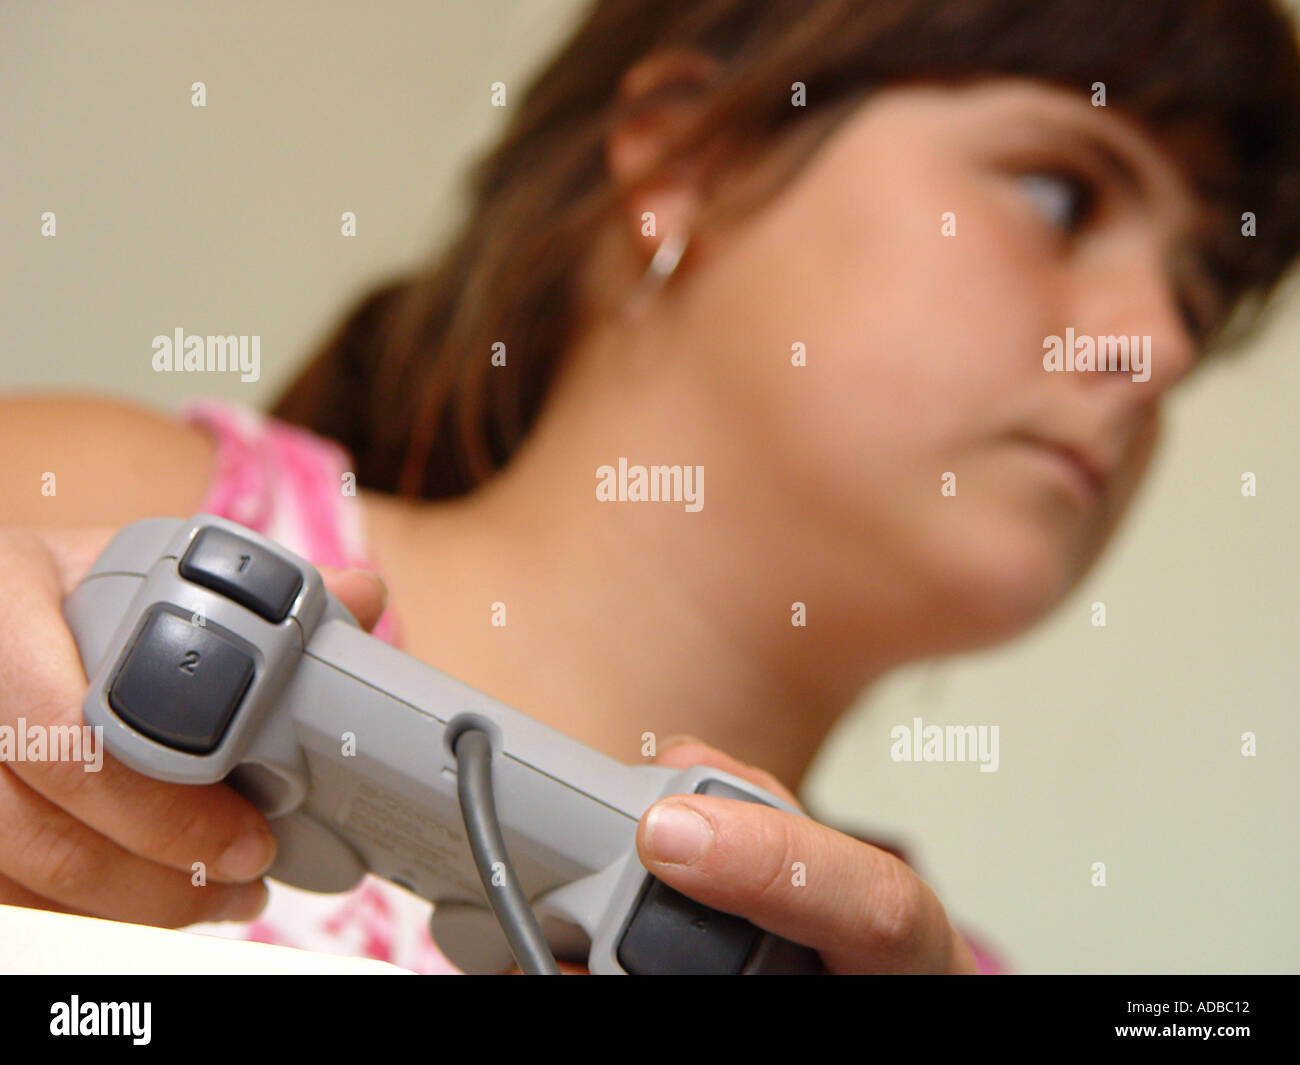 Girl playing a playstation game South Wales GB UK 2003 Stock Photo